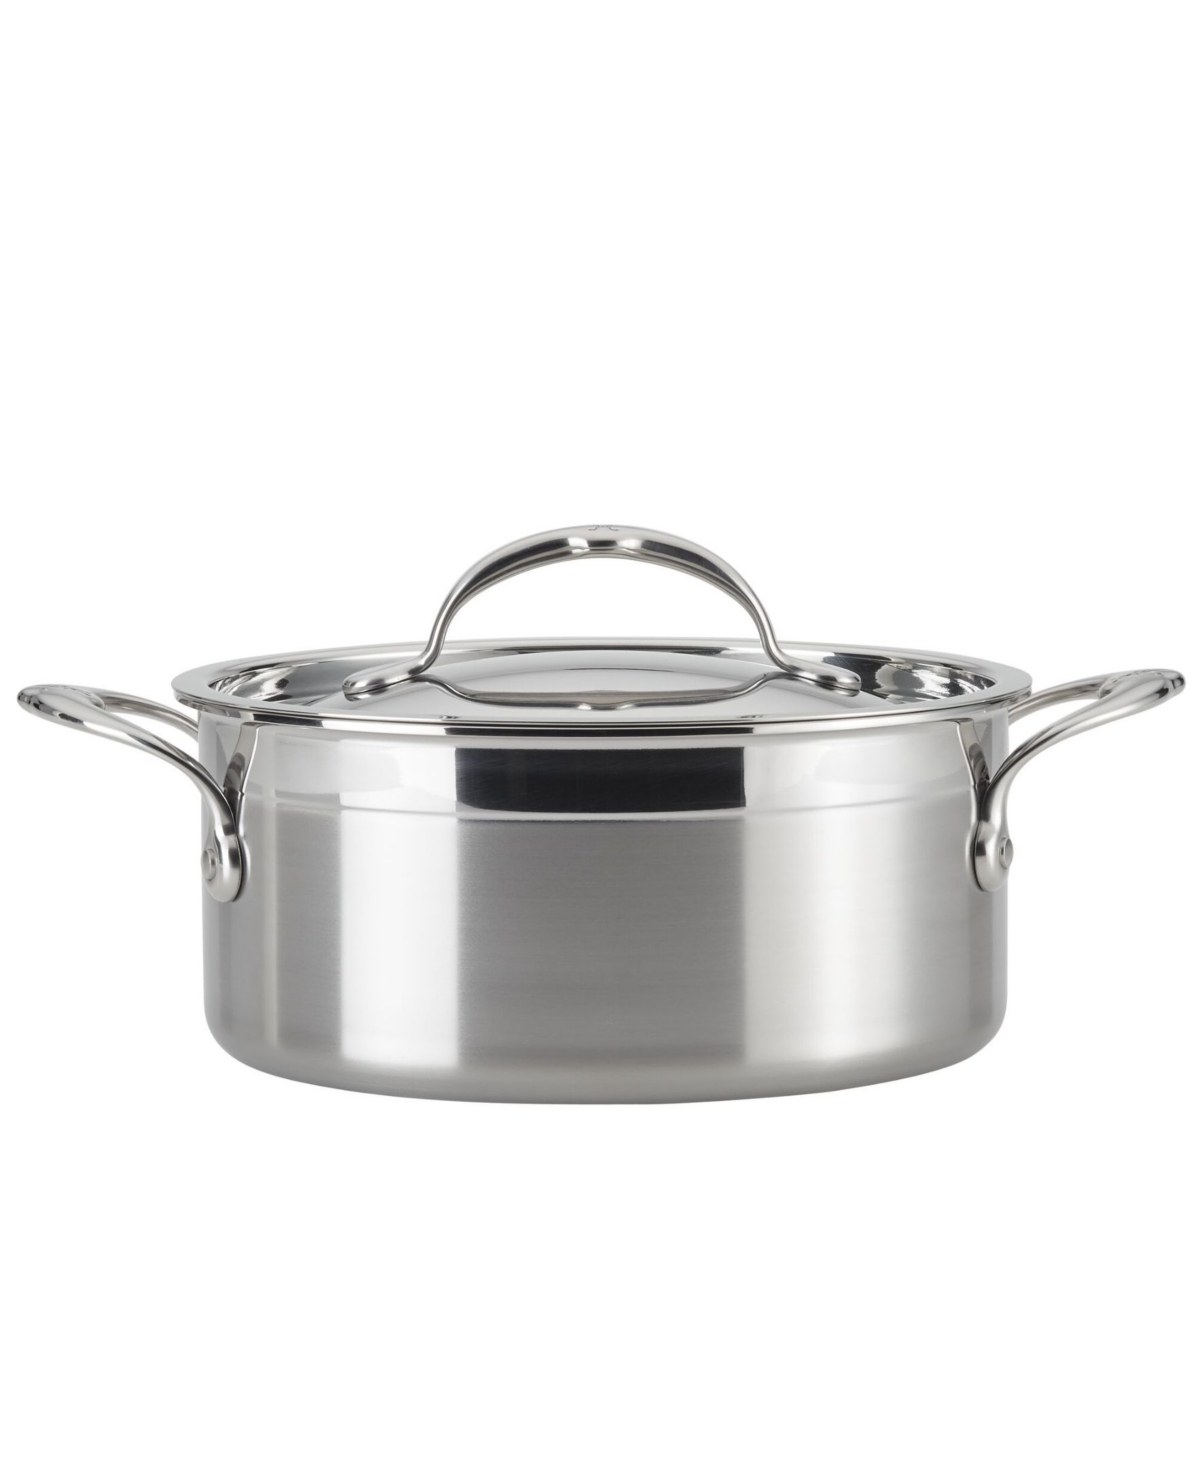 Hestan Probond 3 Quart Forged Stainless Steel Covered Soup Pot In Silver